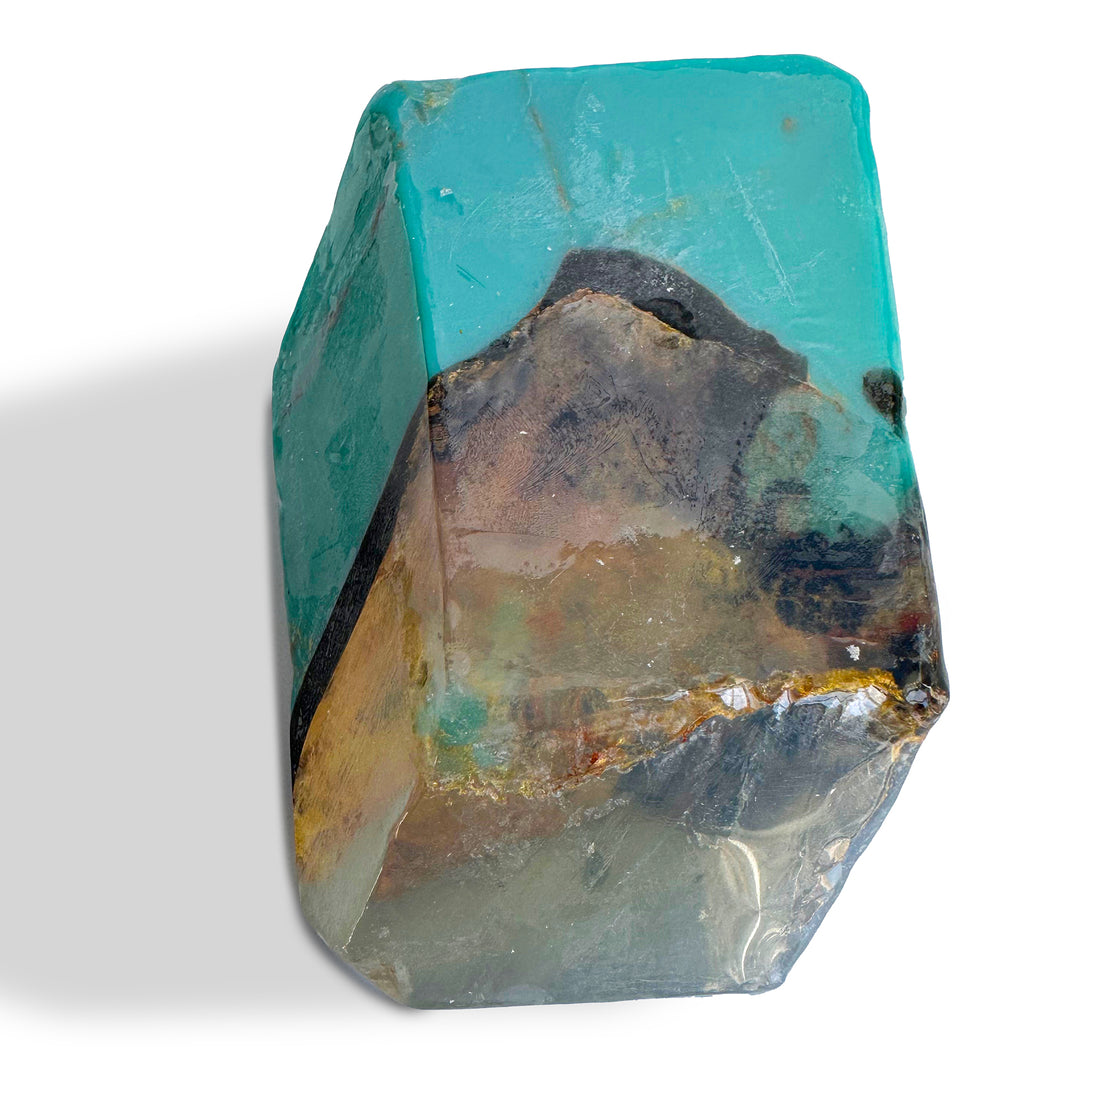 Turquoise SoapRock® - looks like an actual rock of turquoise and quartz, but it's soap!